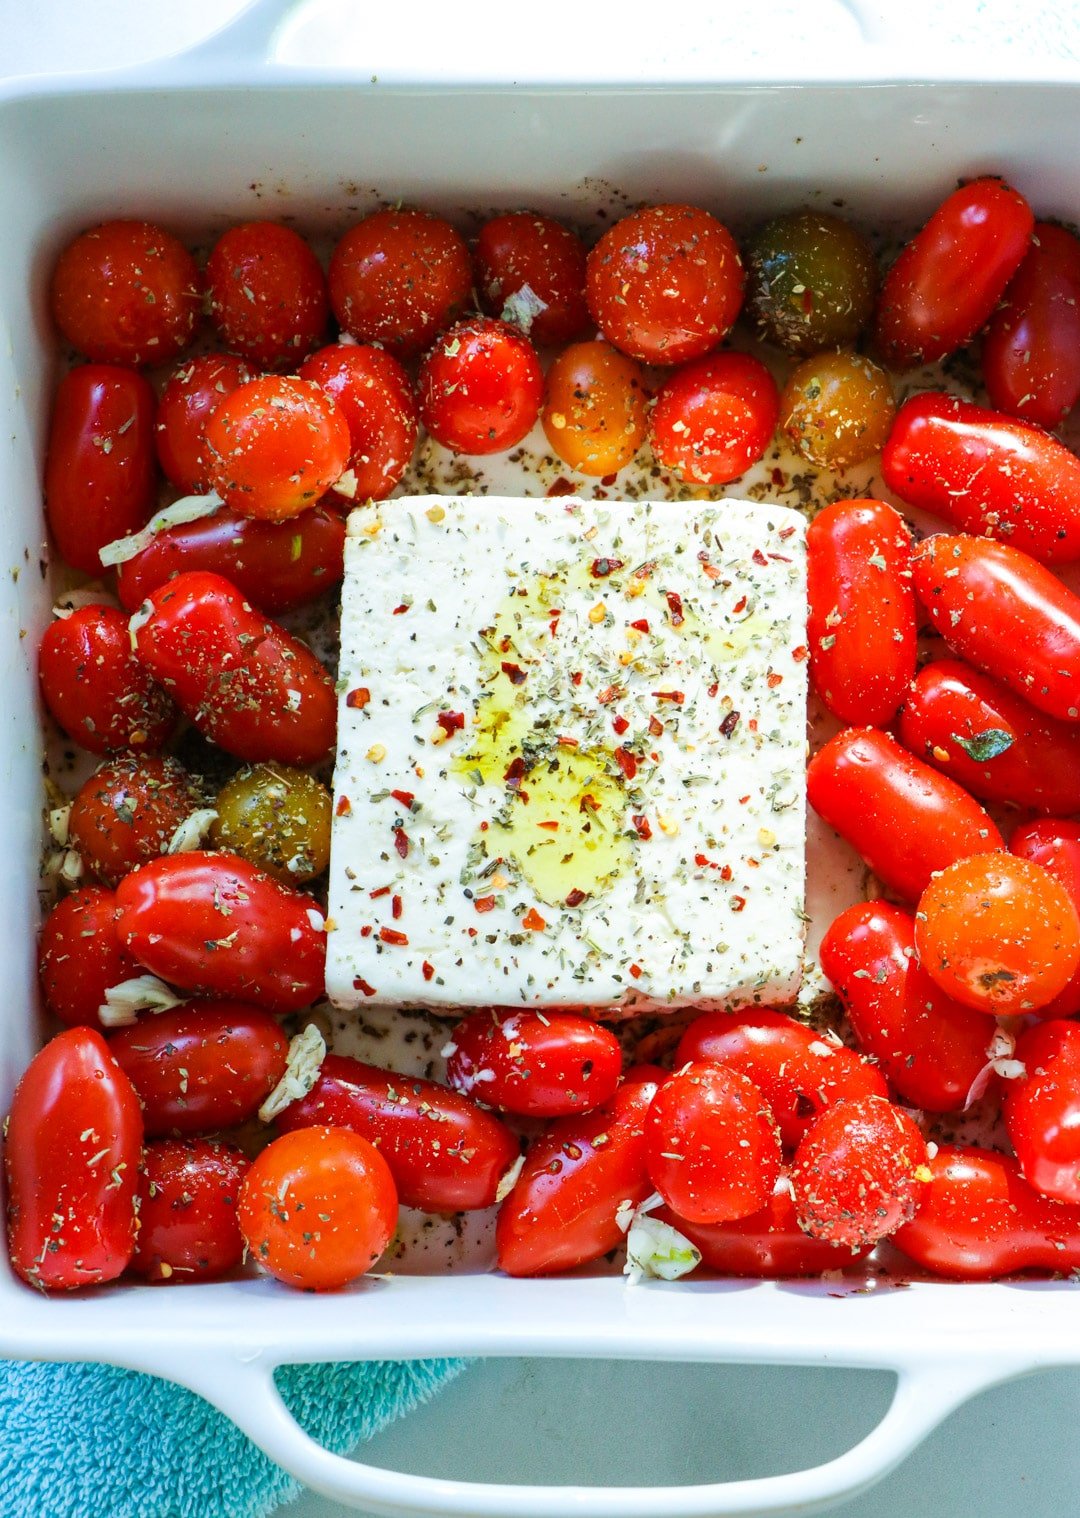 Tomatoes and block of feta in square baking dish.